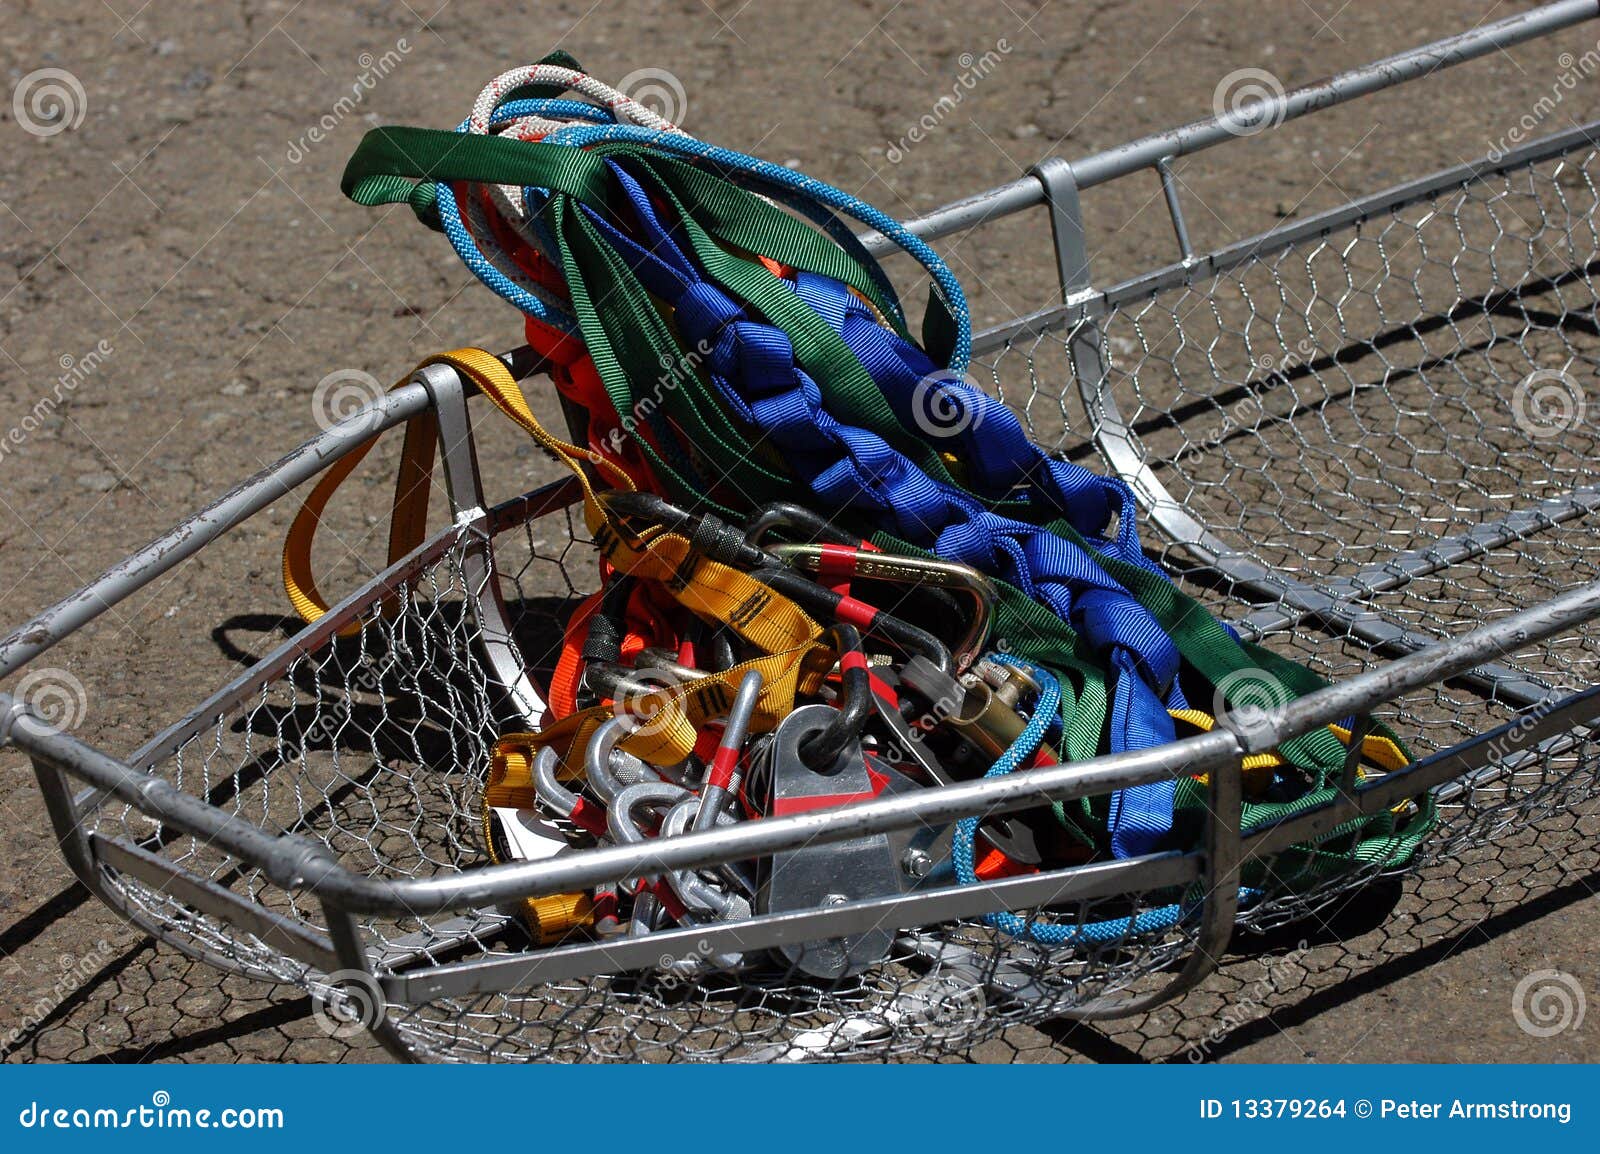 stokkes basket with rescue equipment